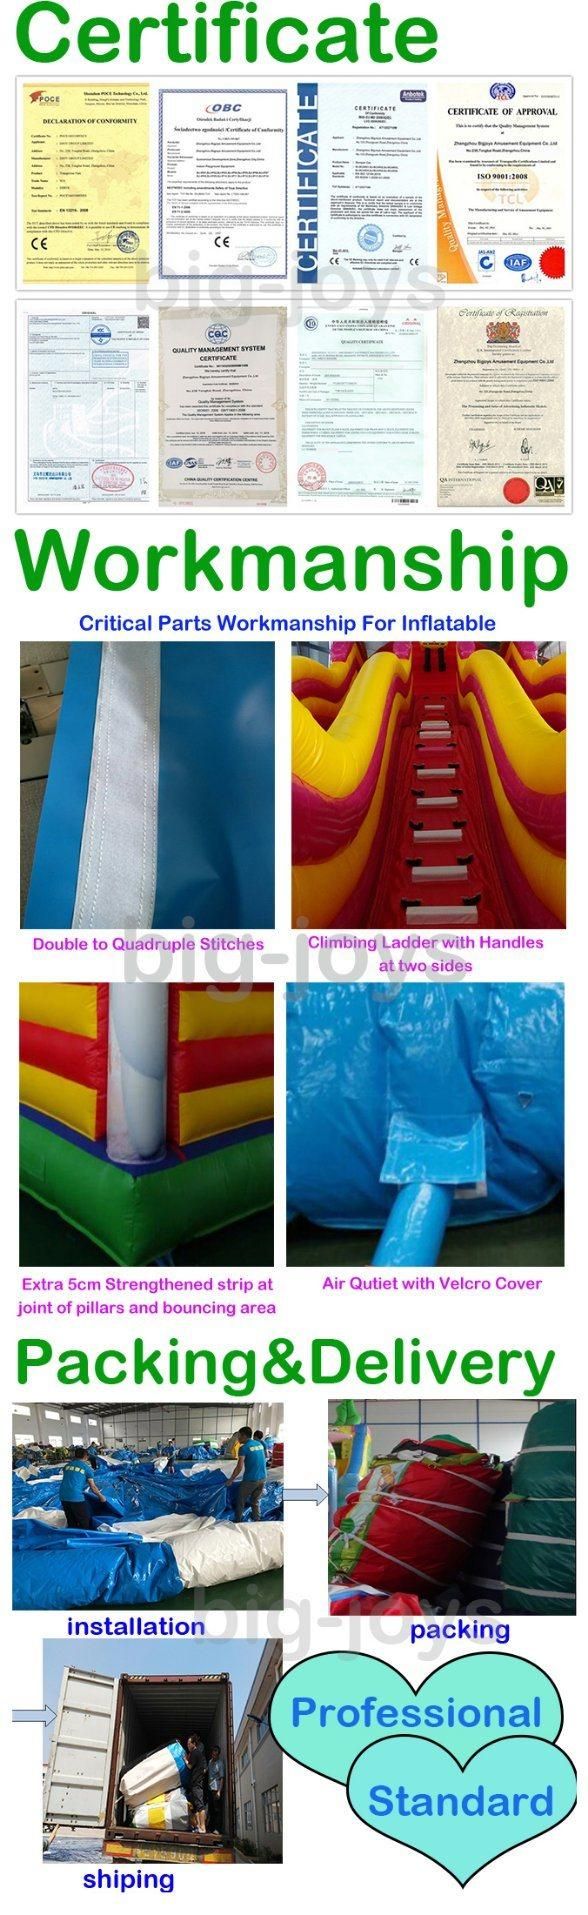 Interactive Inflatables Obstacle, Commercial Inflatable Bouncer House, Inflatable Sports Games